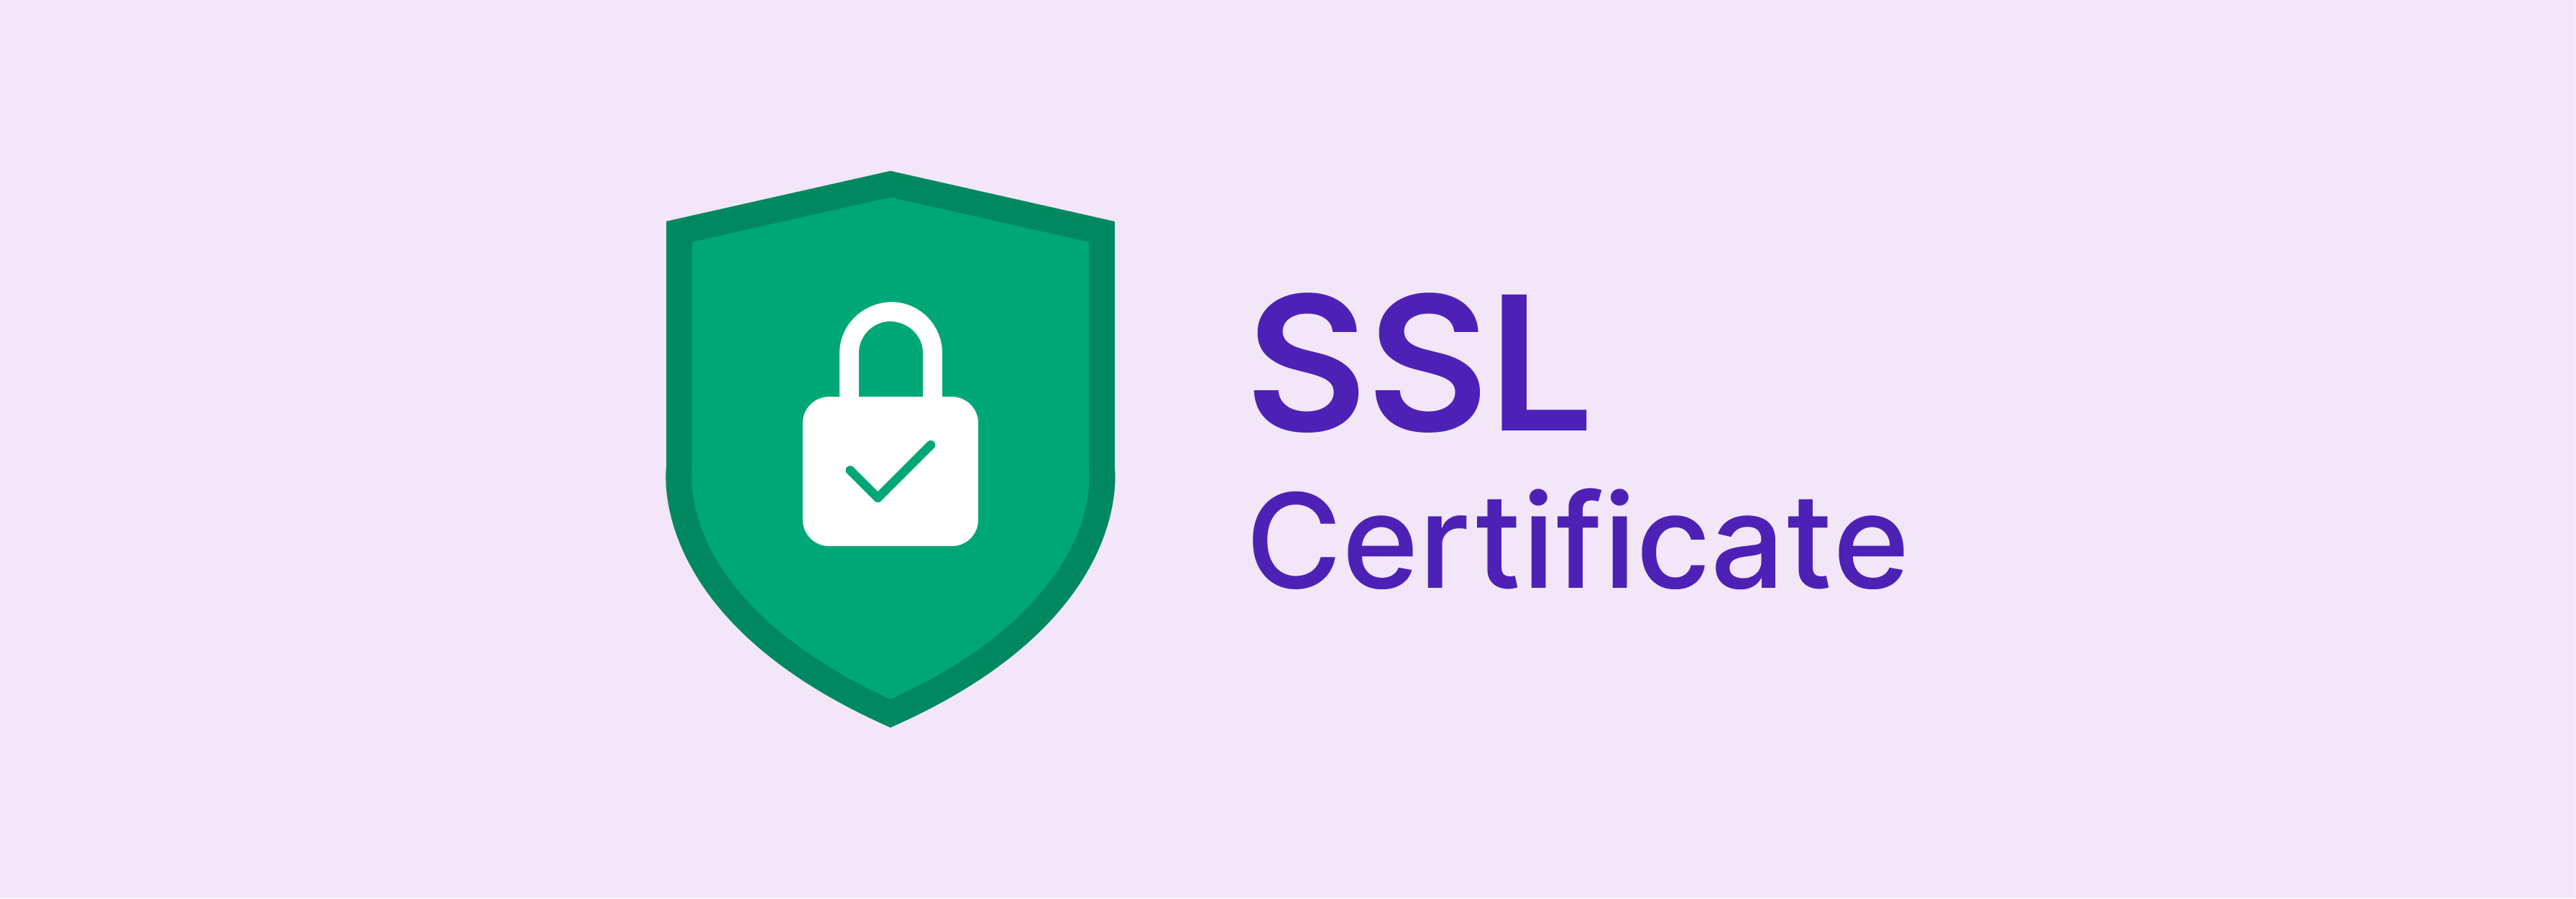 SSL certifications for Magento e-commerce security